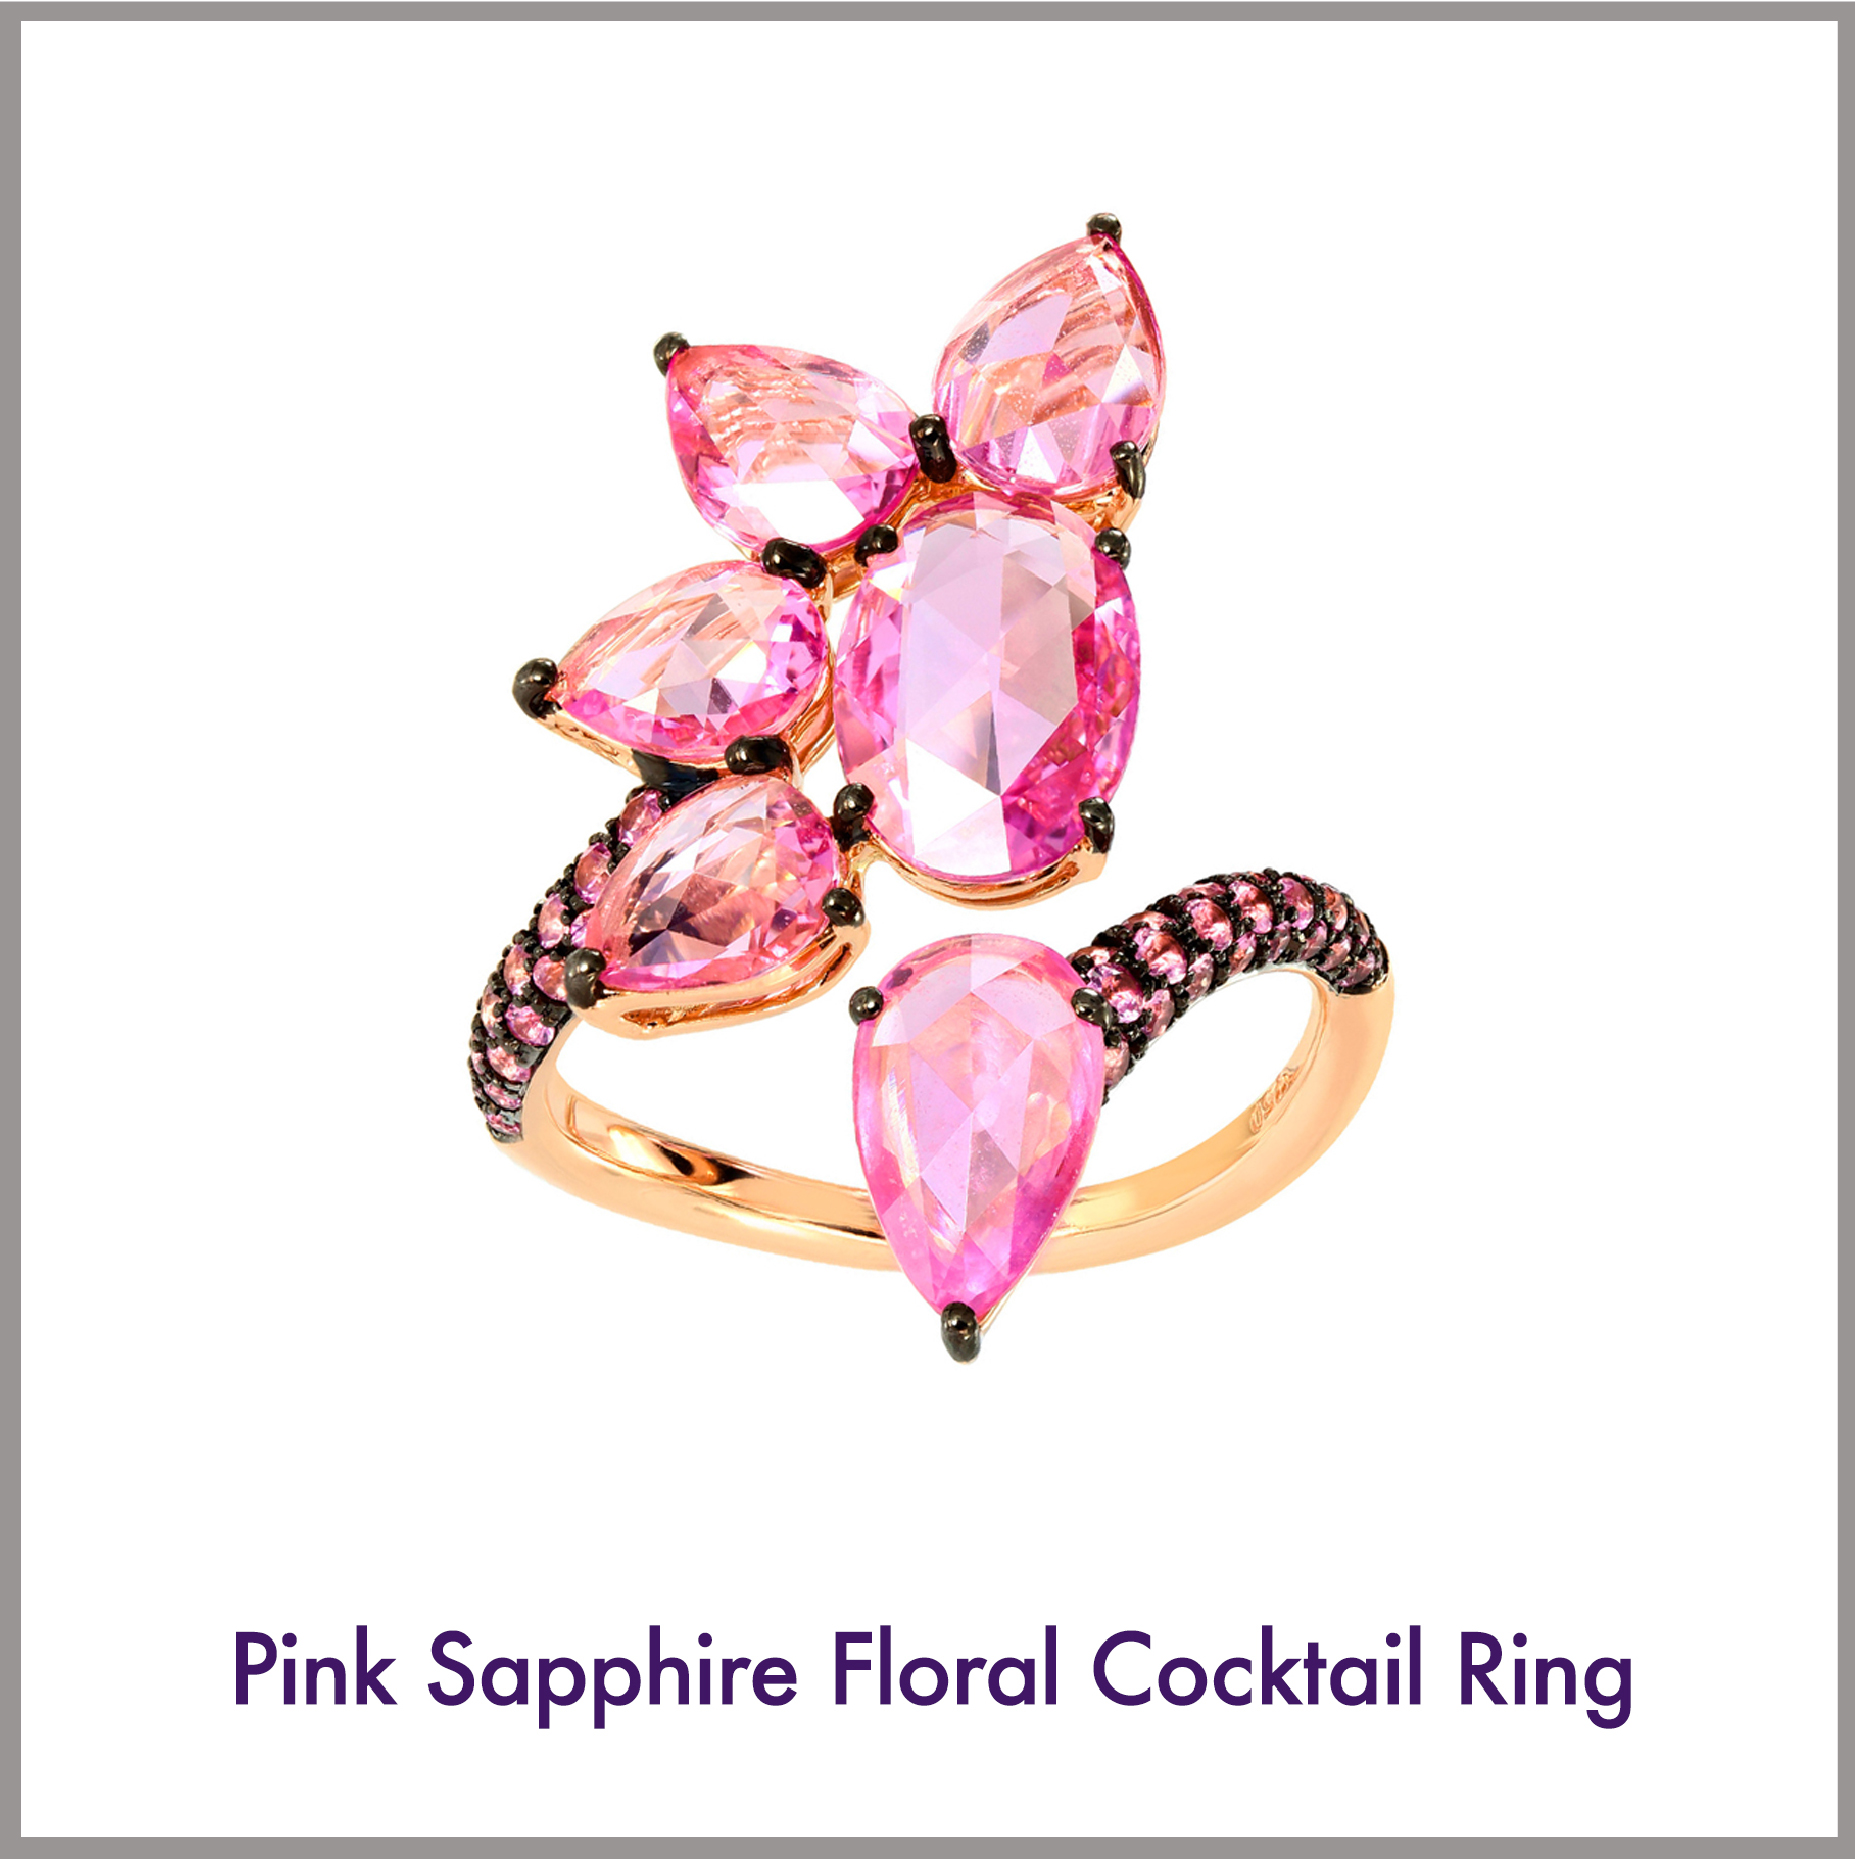 Pink Sapphire Floral Cocktail Ring